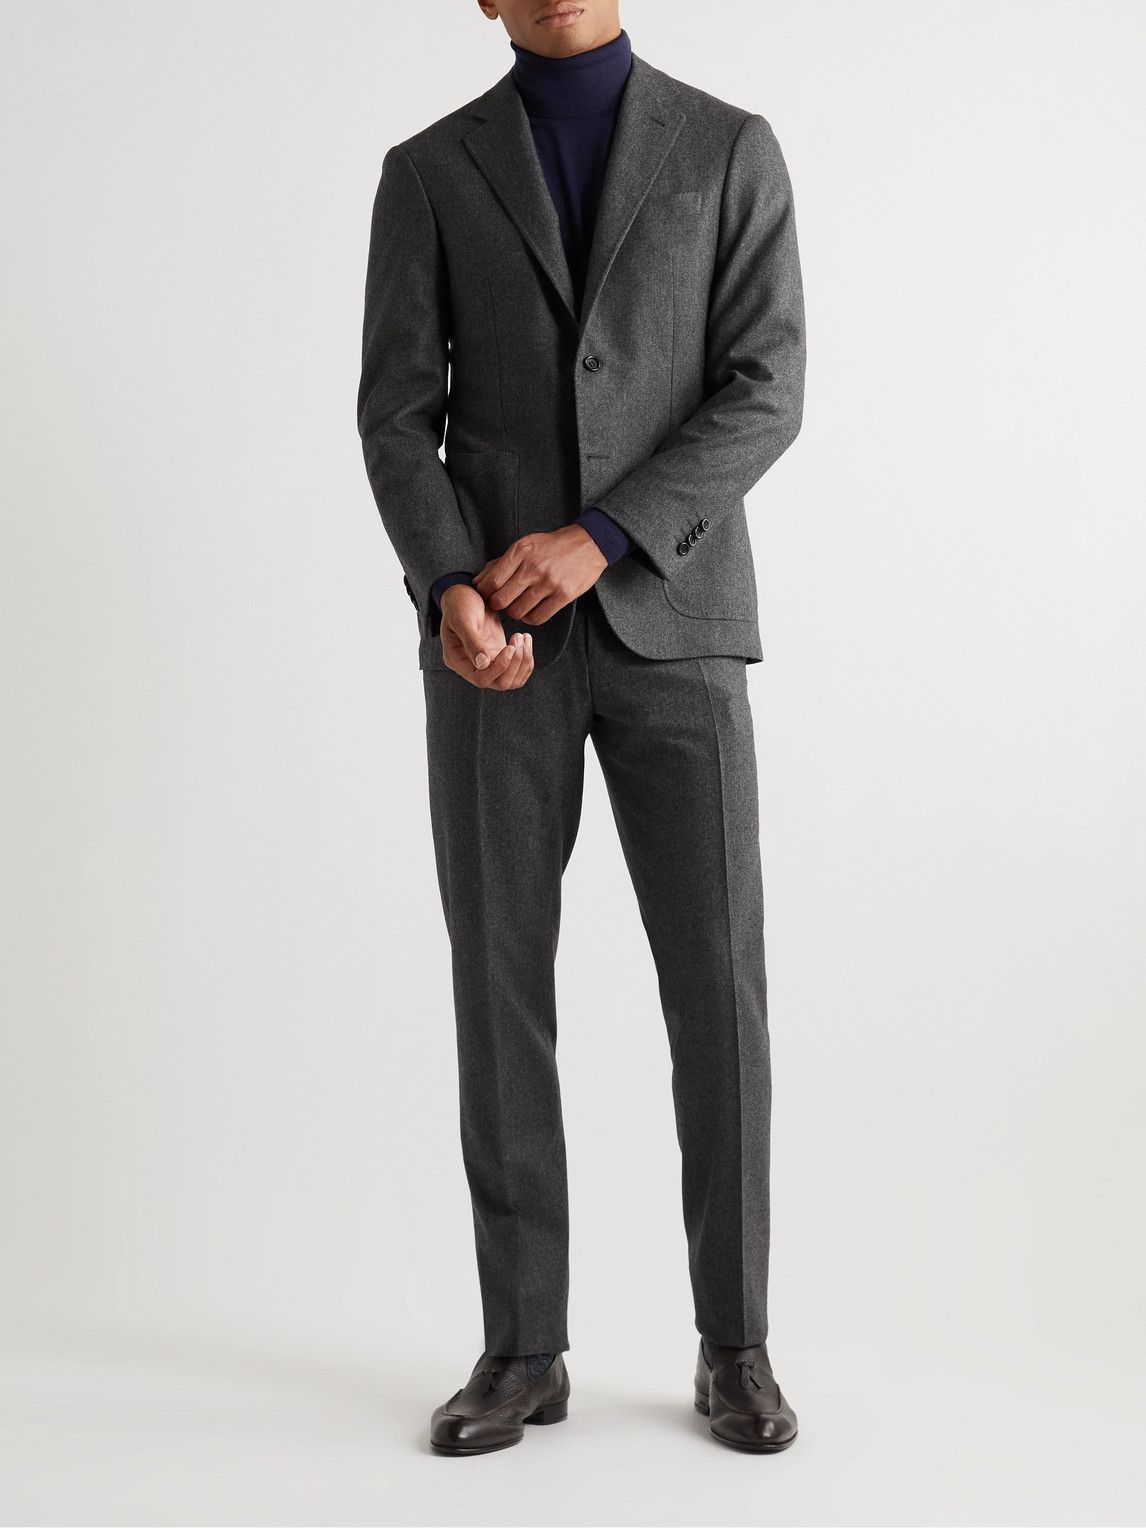 Canali - Kei Slim-Fit Wool Suit Jacket - Gray Canali